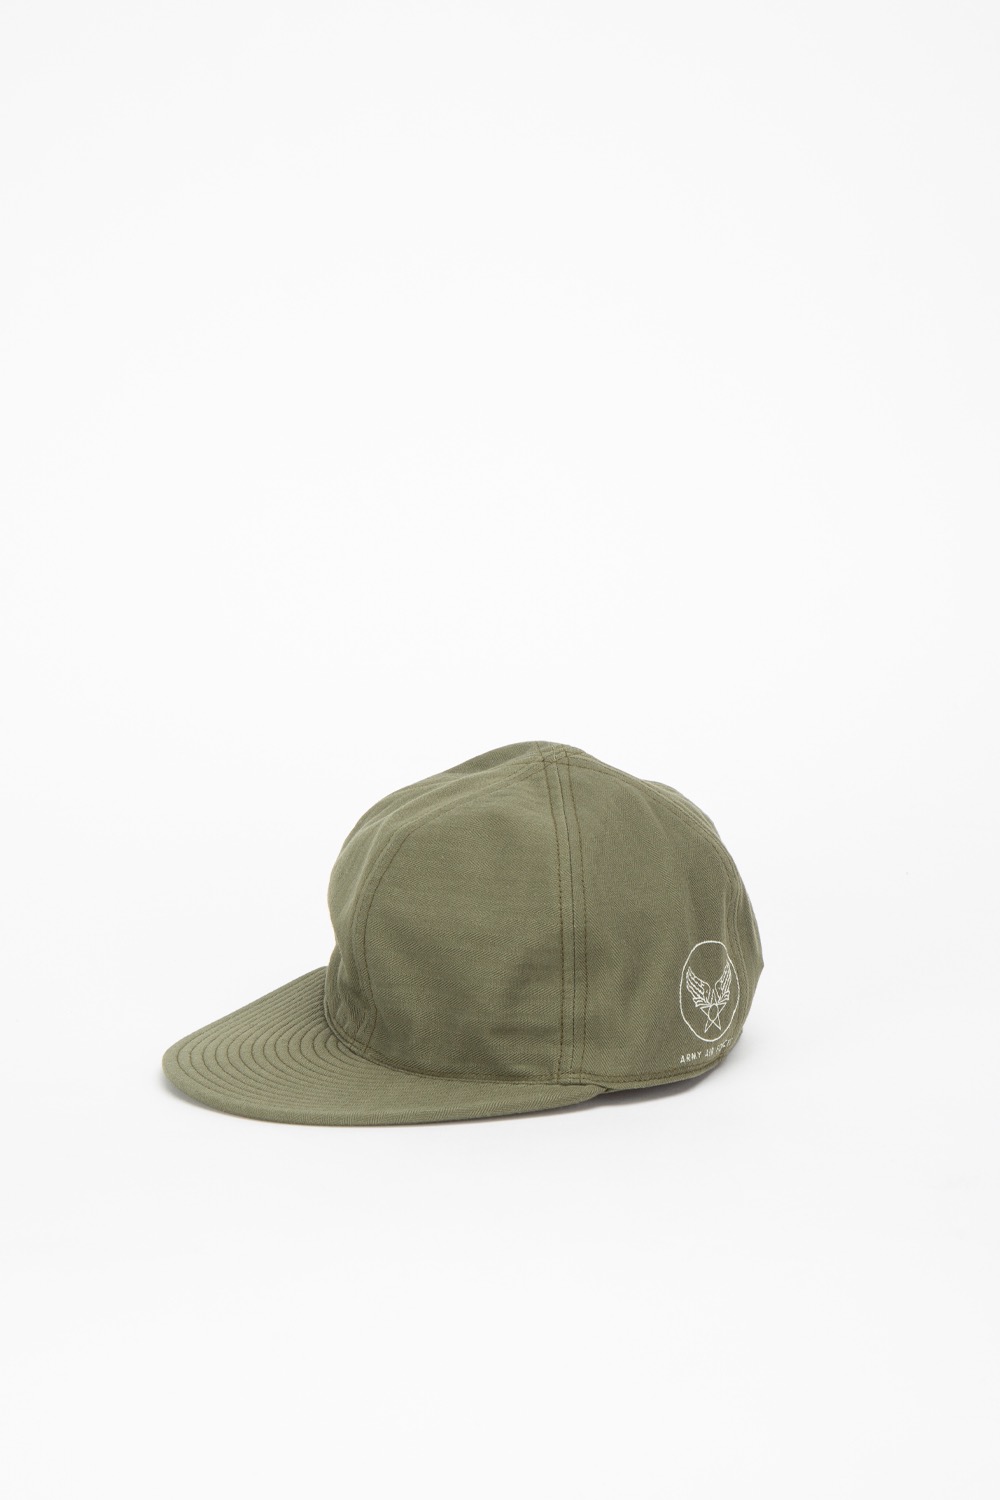 TYPE A-3 CAP / DECAL OLIVE